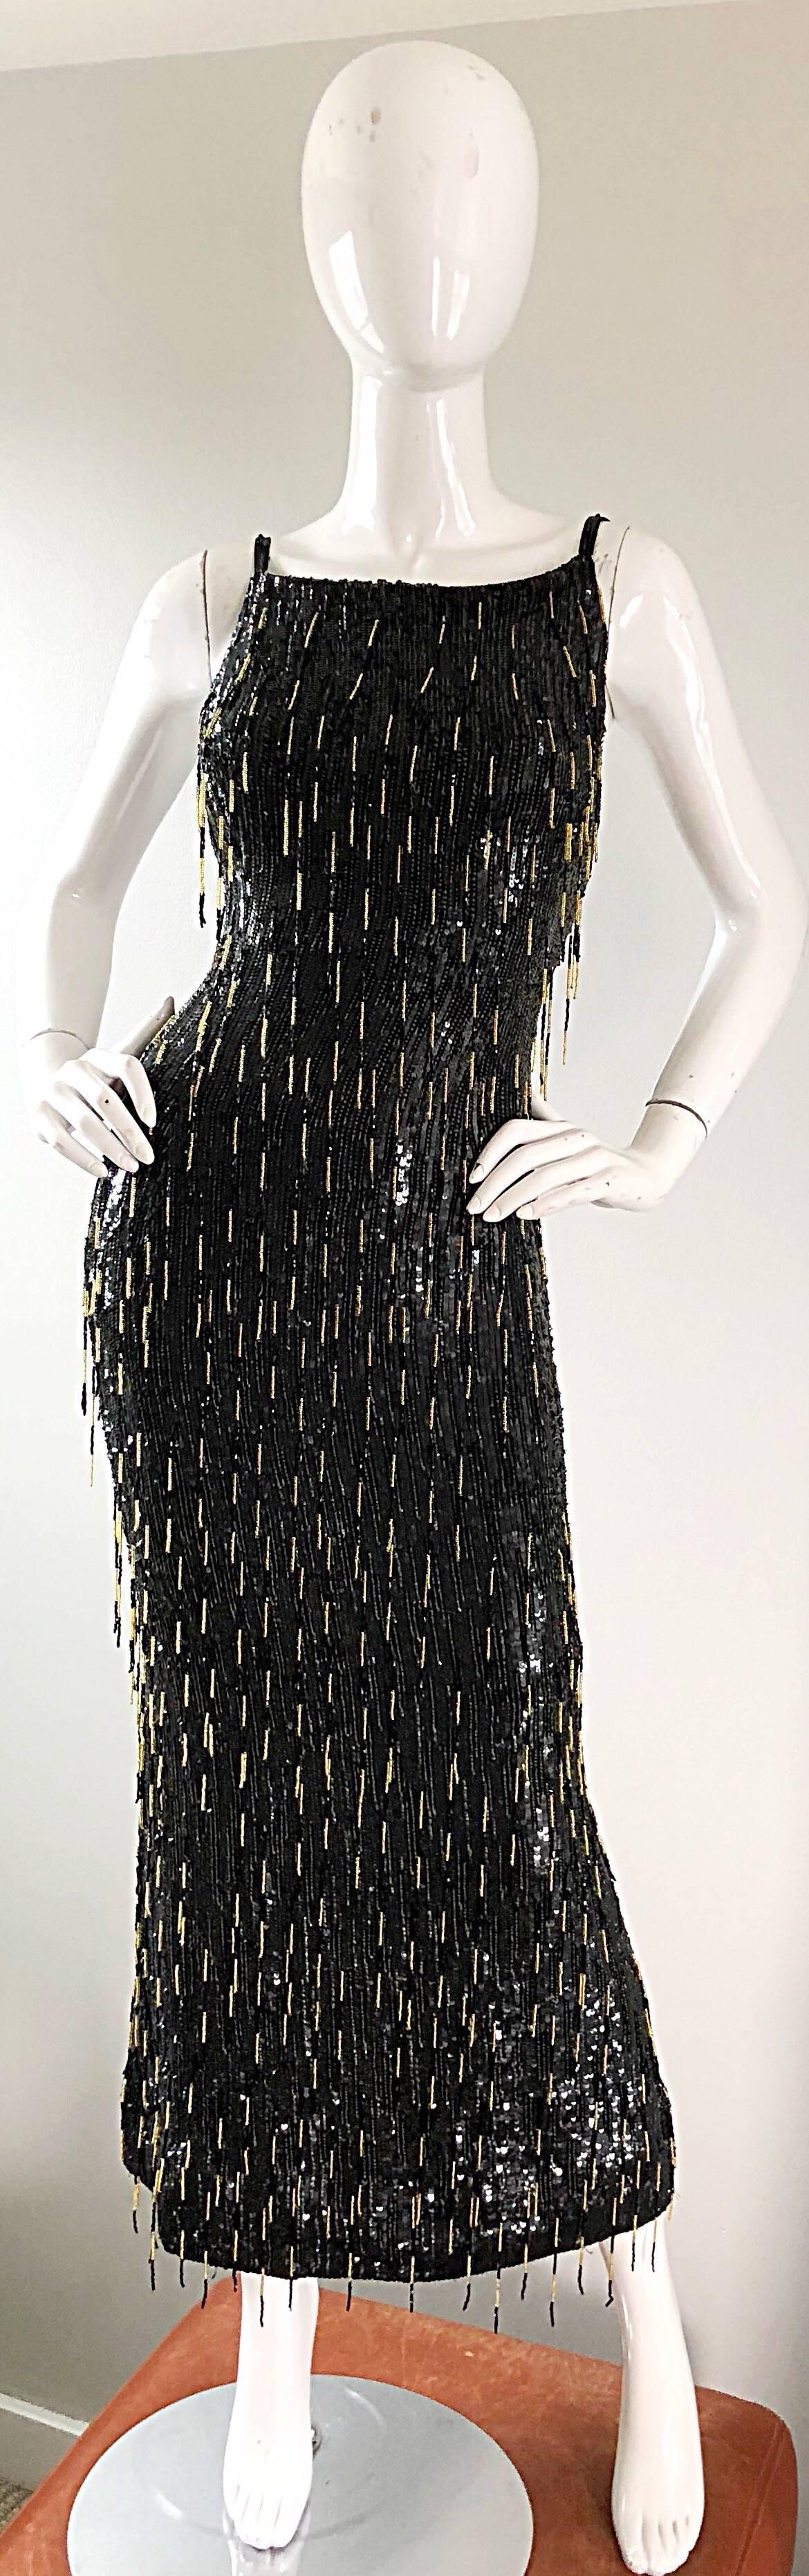 Gorgeous early 1990s ESCADA COUTURE black and gold beaded full length fringe flapper style evening dress! Features a black silk base, with thousands of hand-sewn black sequins throughout the entire dress. Hundreds of hand-sewn fringes in black and